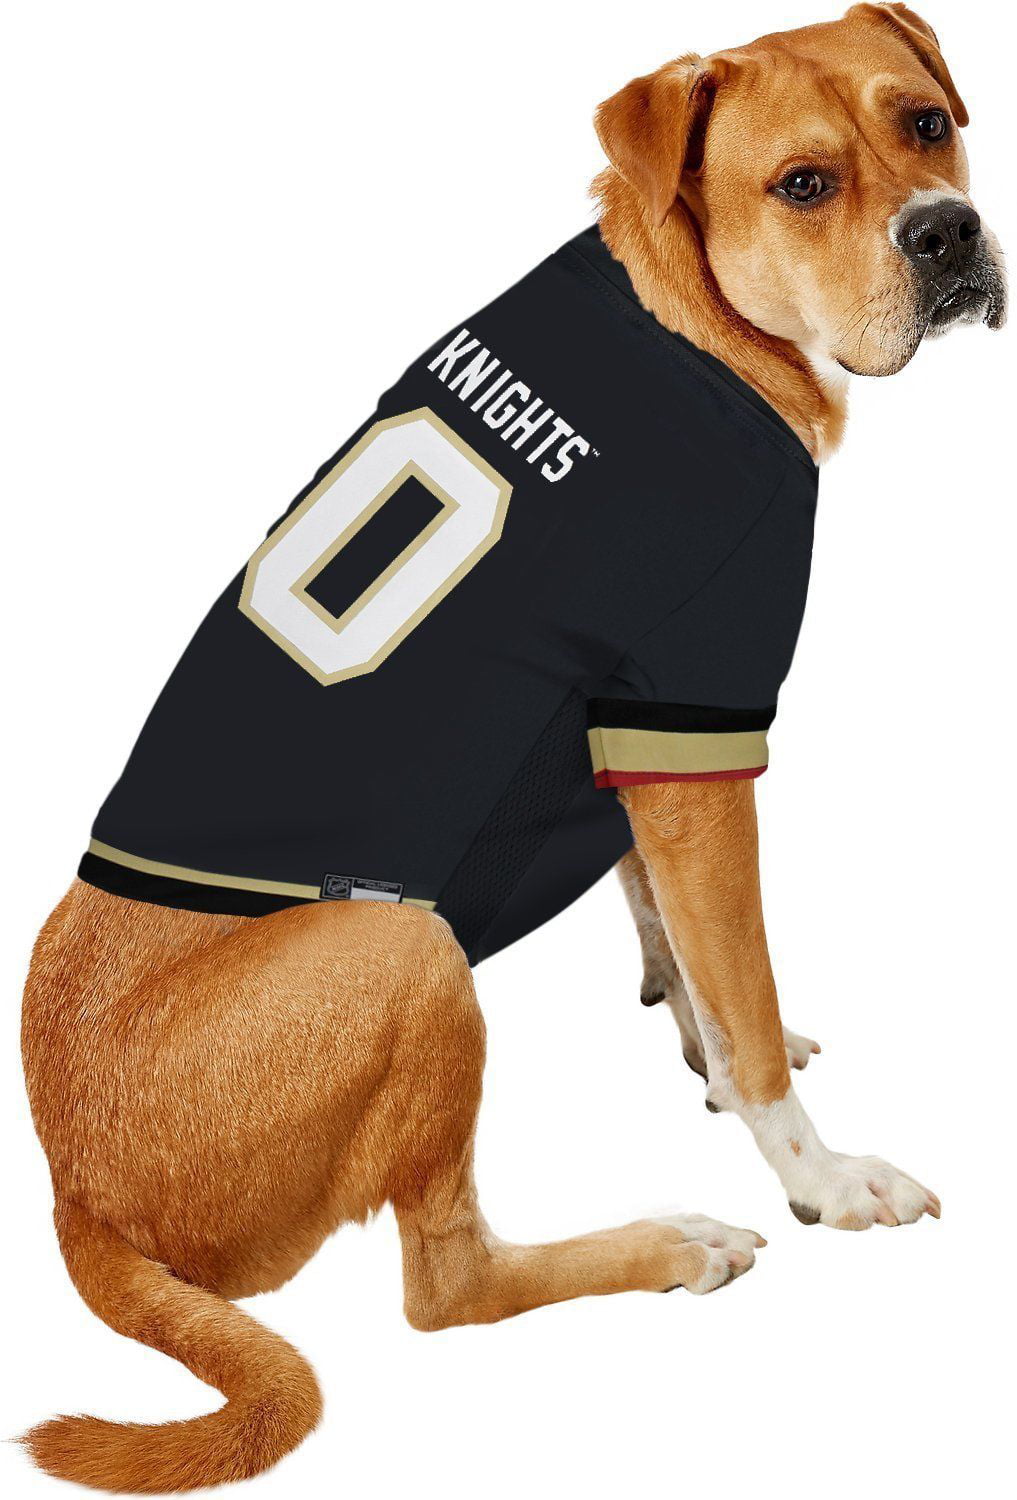 Pets First NHL Vegas Golden Knights T-Shirt - Licensed, Wrinkle-free,  stretchable Tee Shirt for Dogs & Cats 